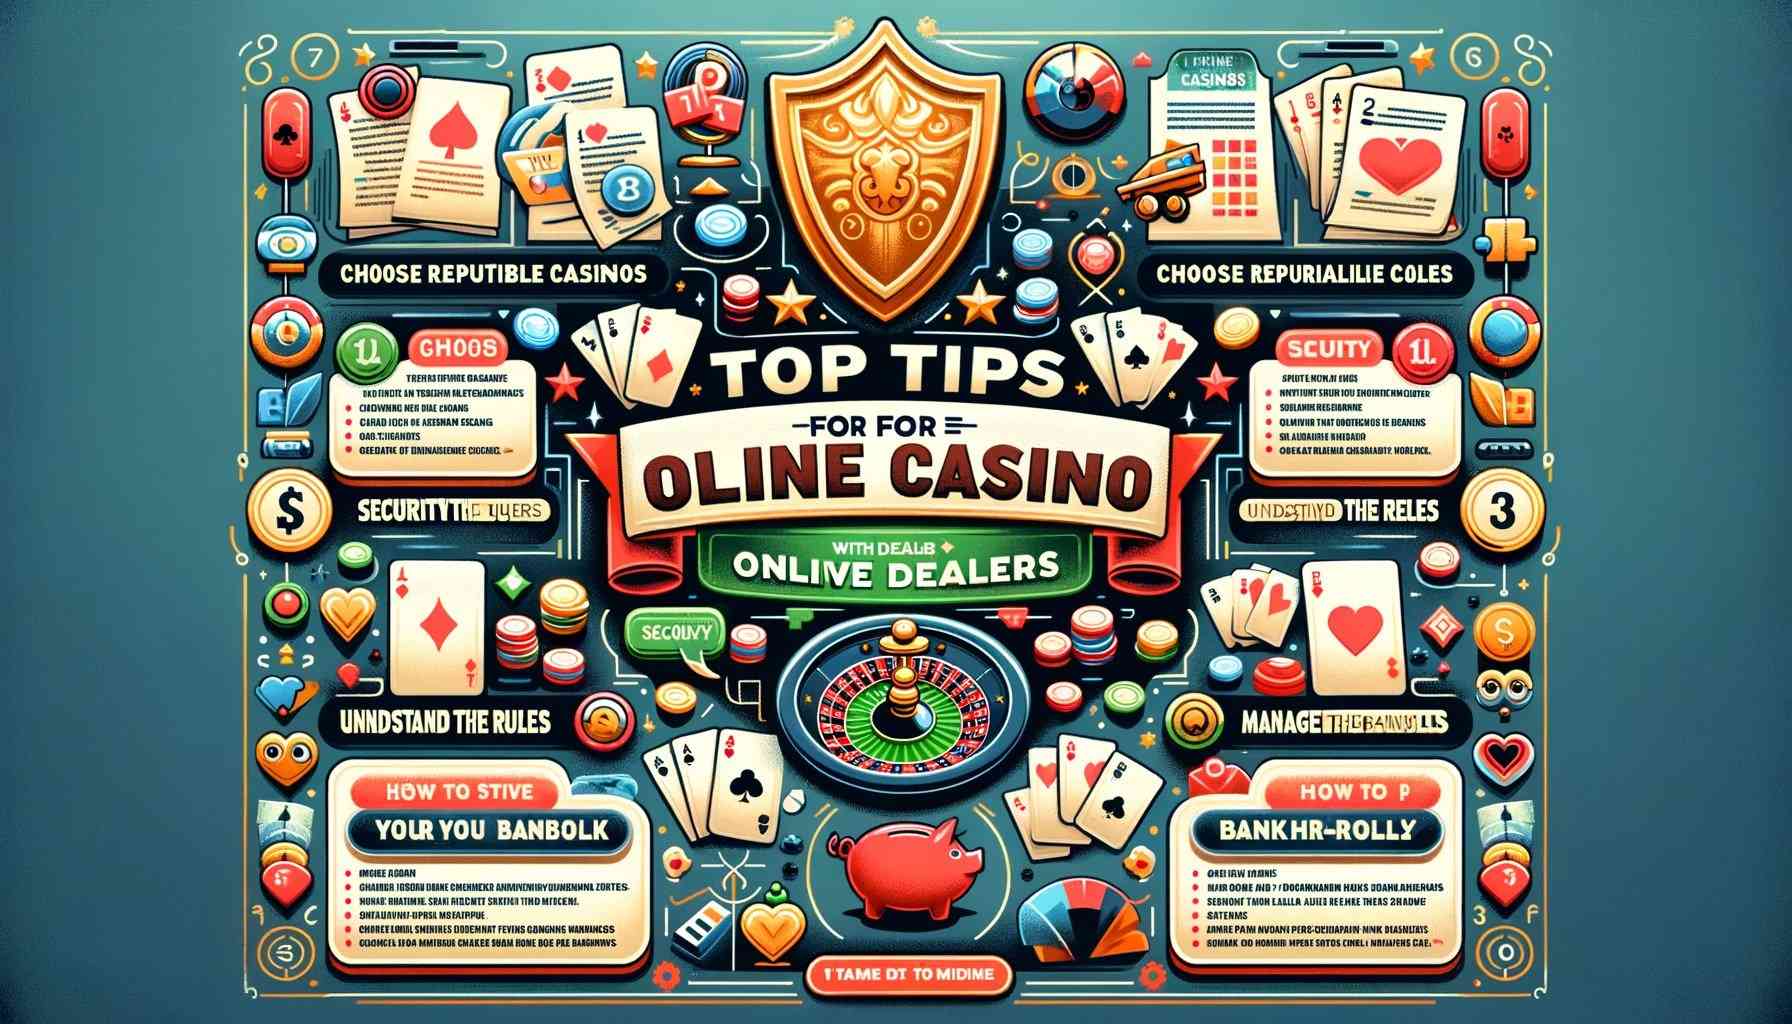 Top tips for online casinos with live dealers